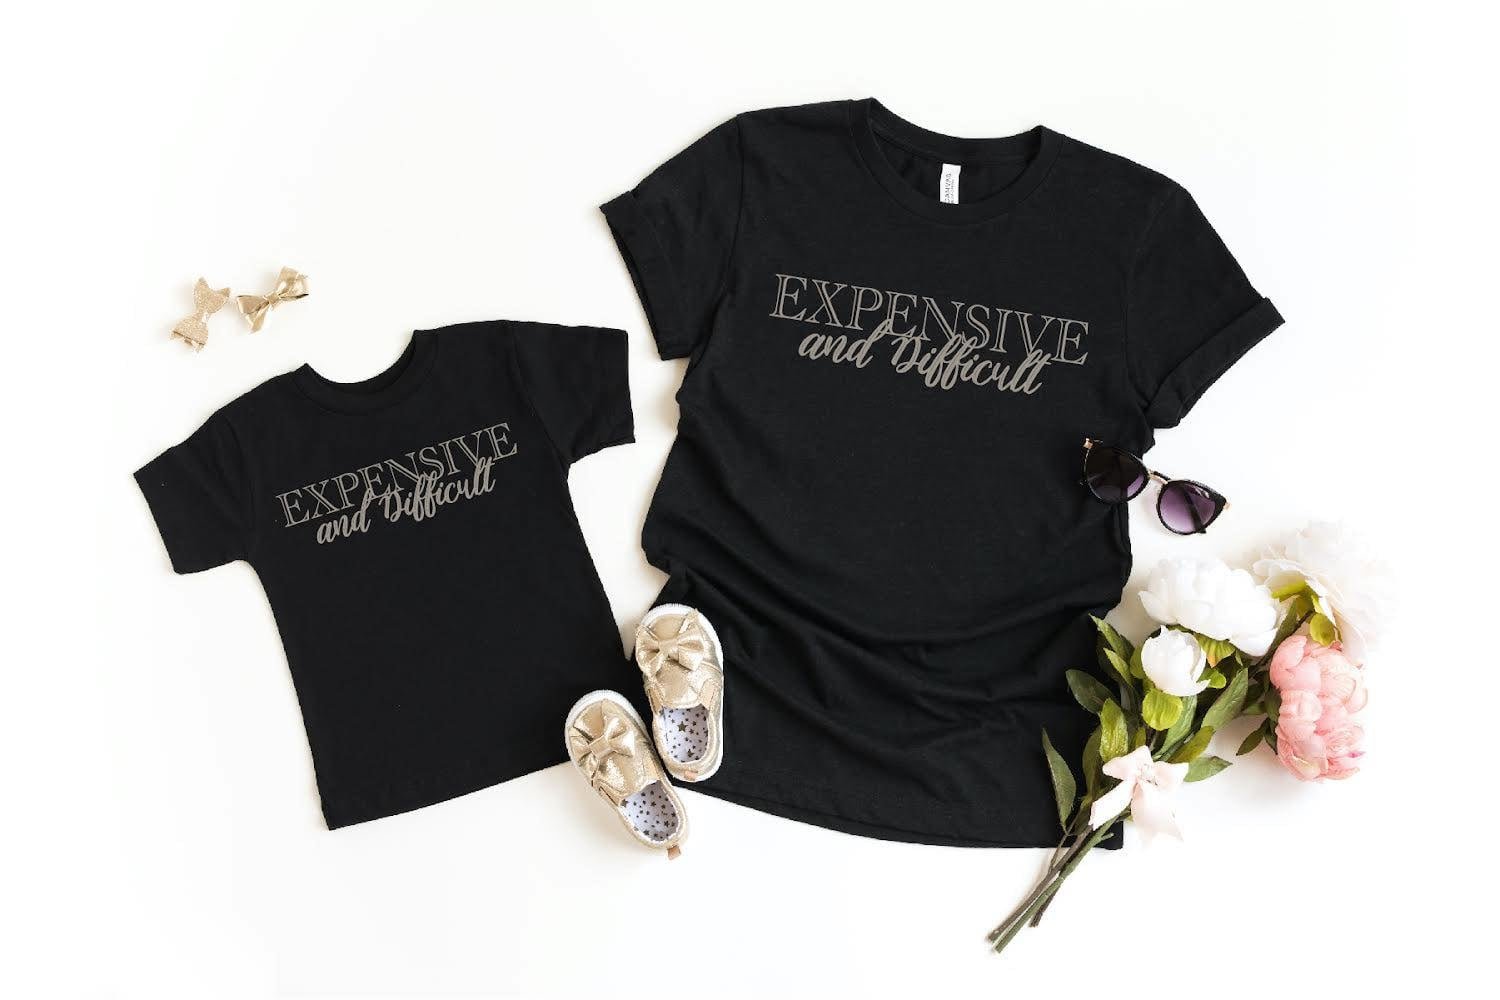 Expensive and Difficult T-Shirt - Lavender Hills BeautyShe Shed Wholesale